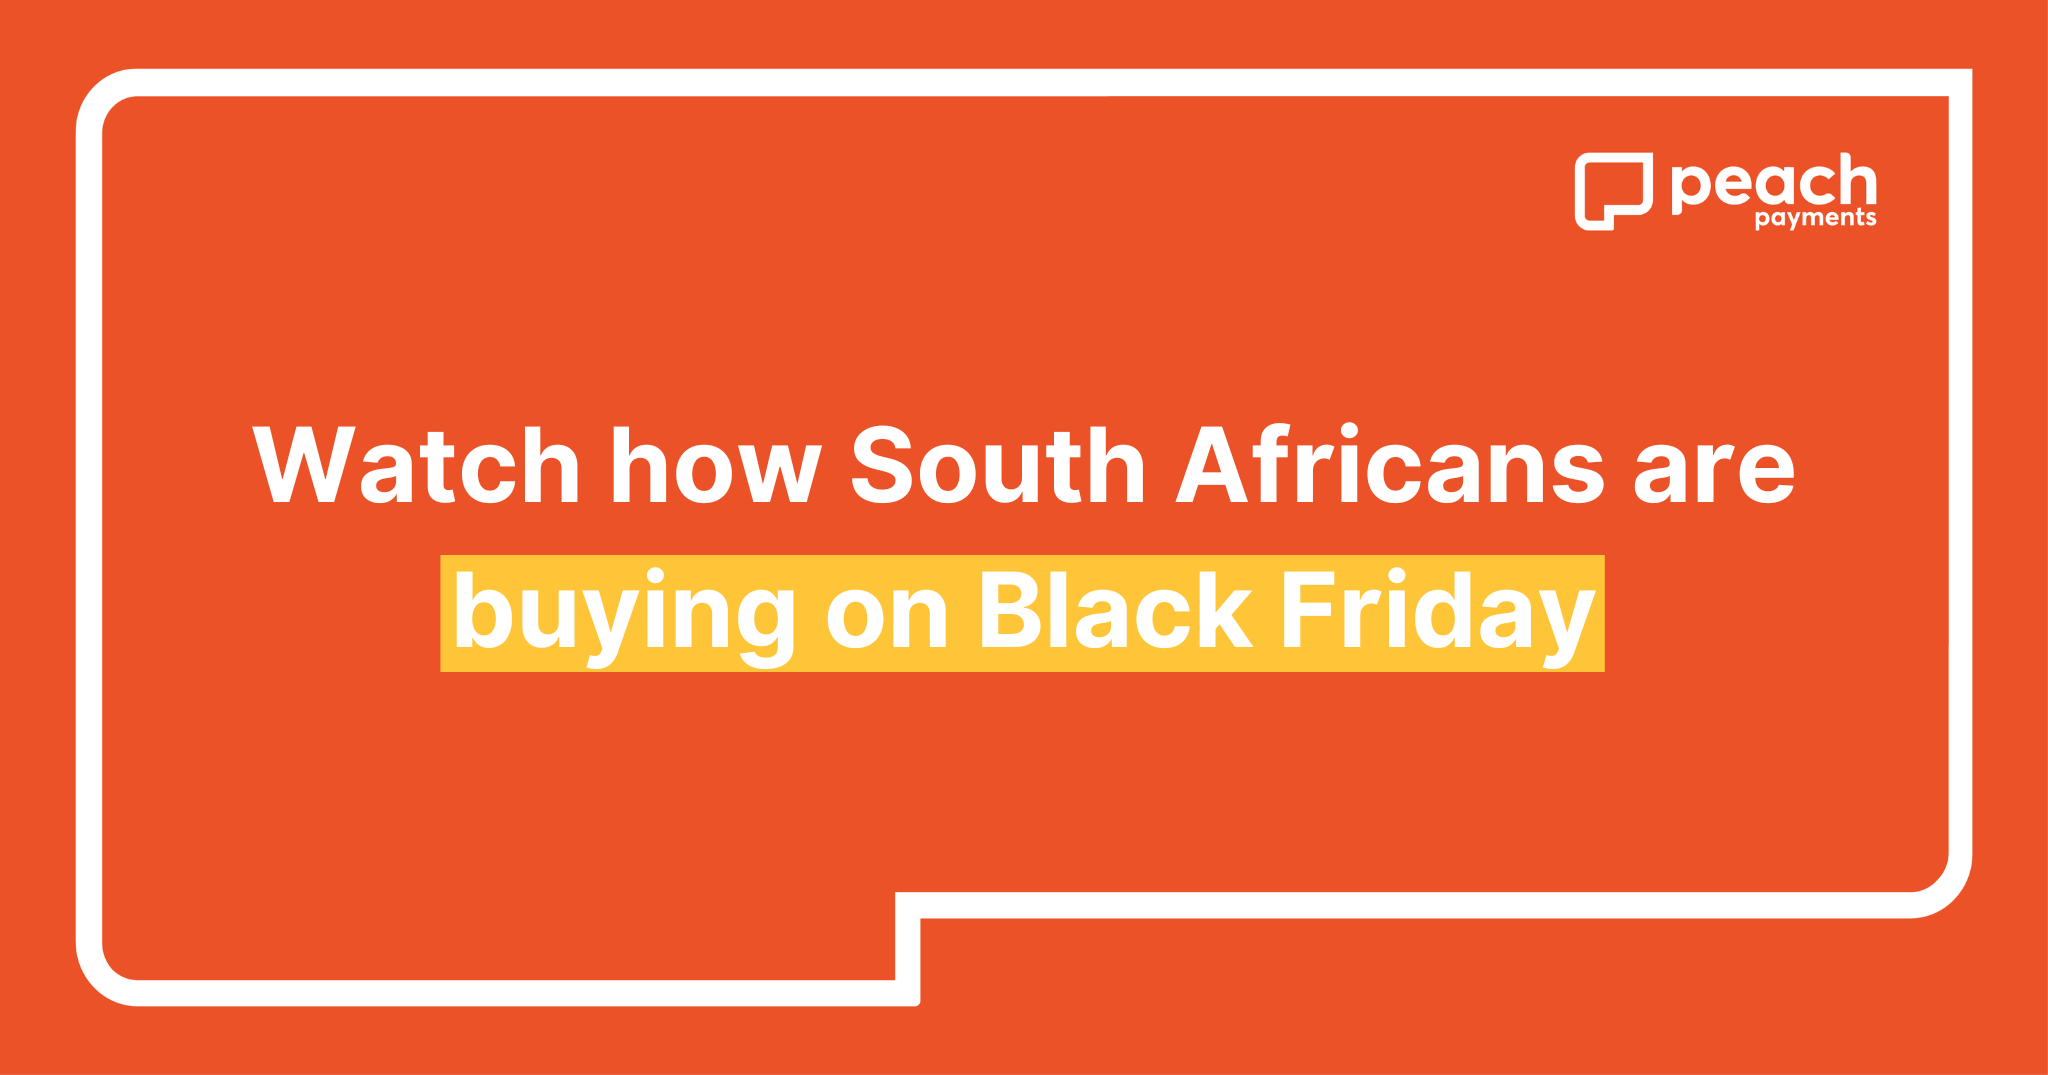 Watch how South Africans are buying on Black Friday